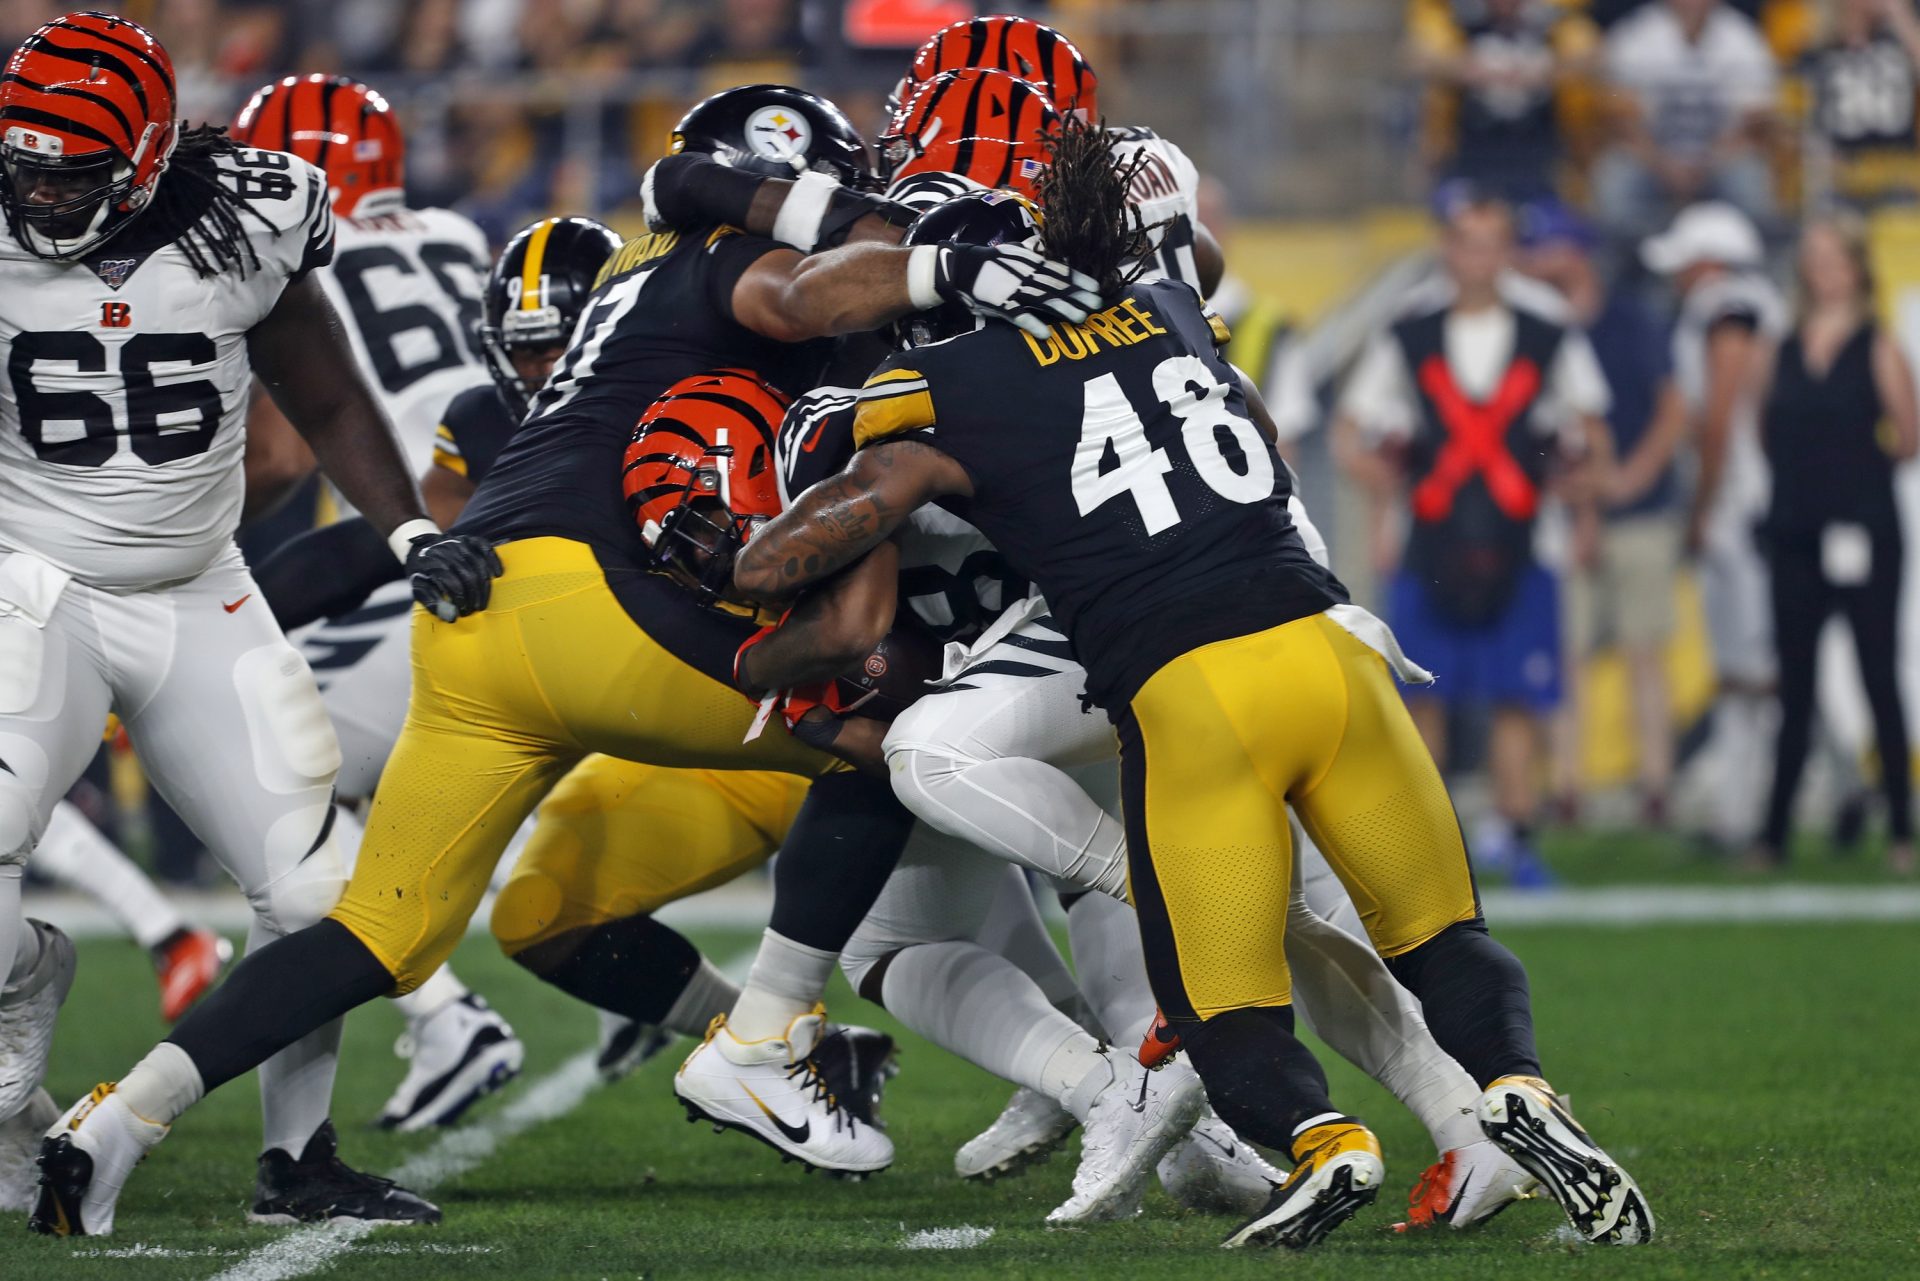 Cincinnati Bengals running back Joe Mixon, center, is tackled by Pittsburgh Steelers defensive end Cameron Heyward, left, and outside linebacker Bud Dupree (48) during the first half of an NFL football game in Pittsburgh, Monday, Sept. 30, 2019.